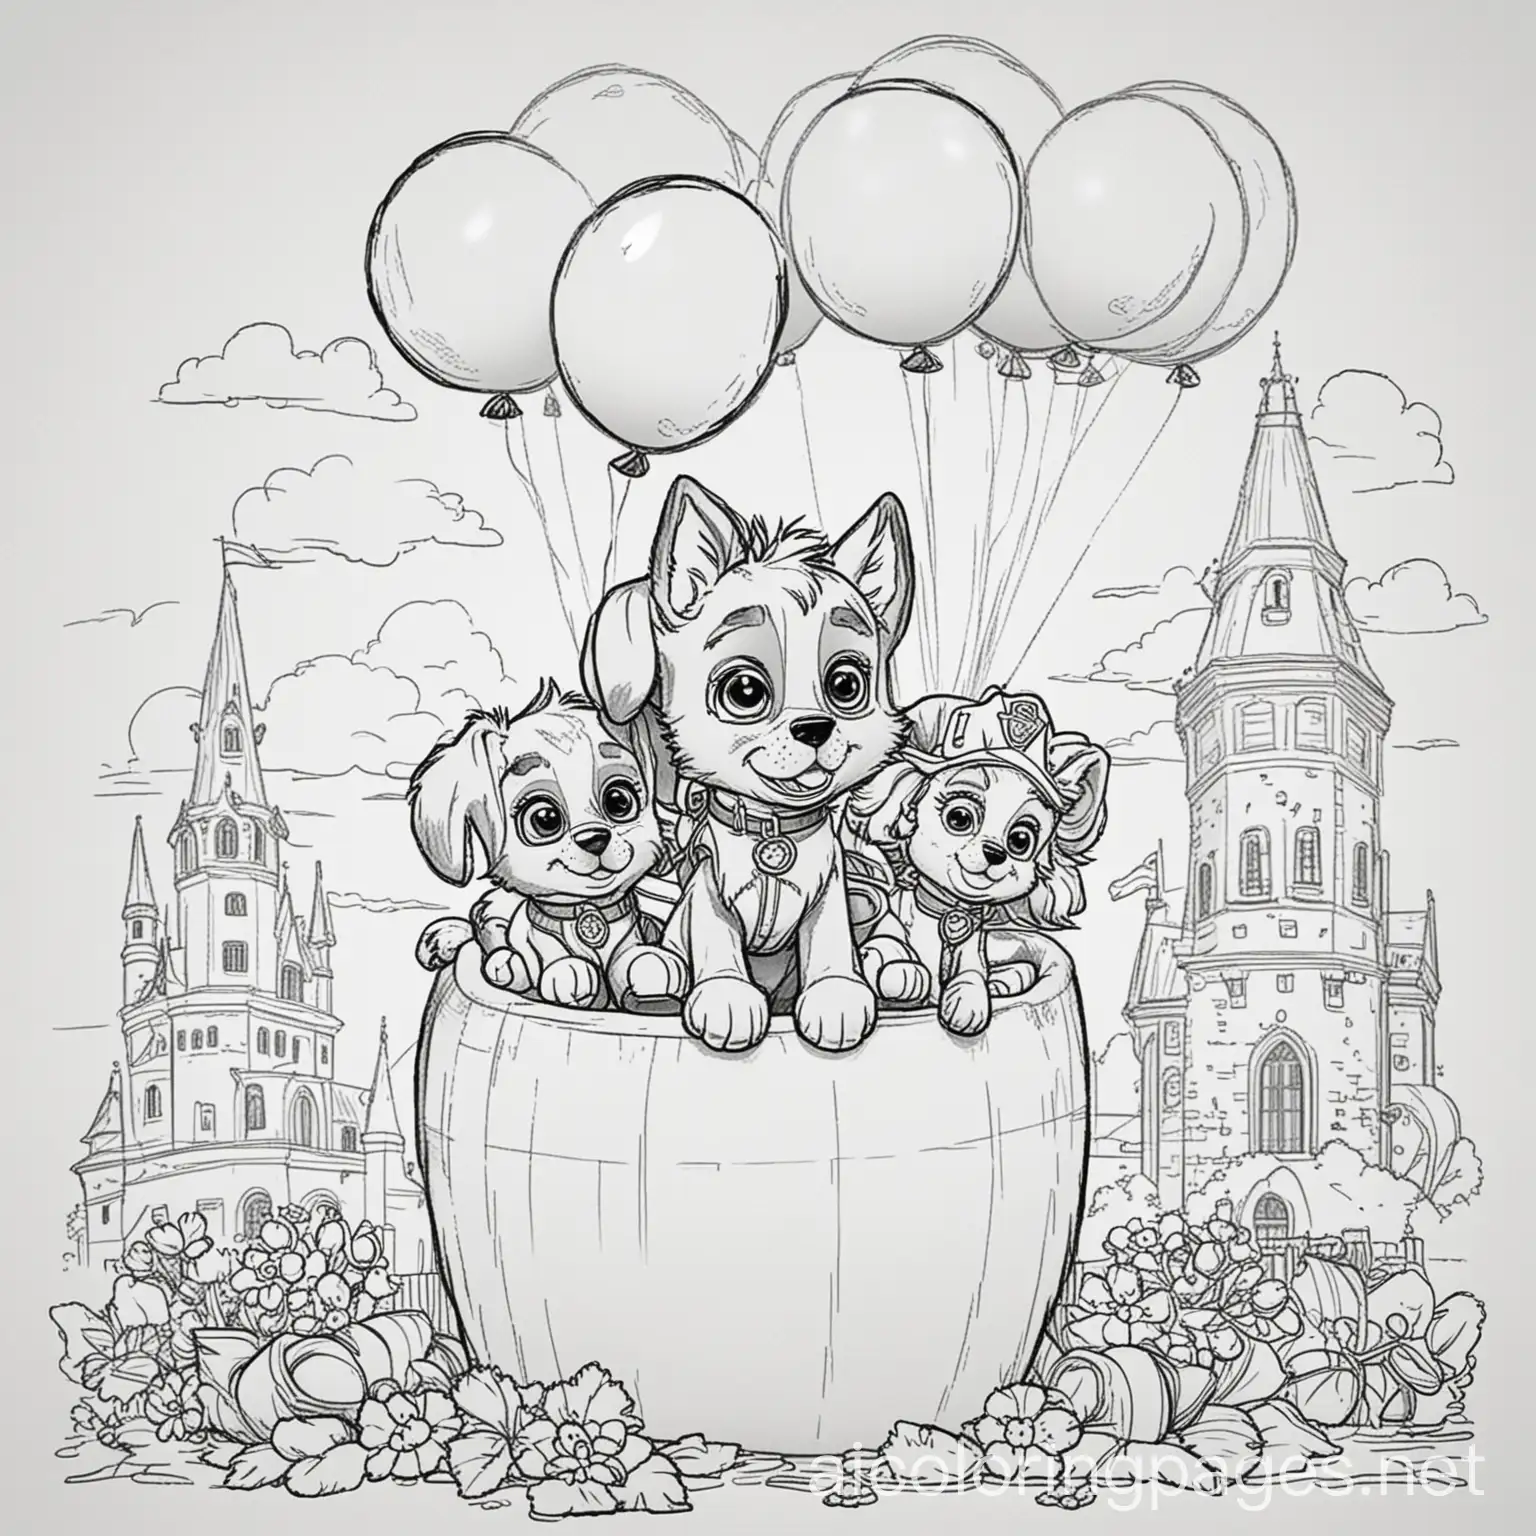 Kids-Playing-with-Paw-Patrol-Characters-at-Kaunas-Castle-Fun-Coloring-Page-Outline